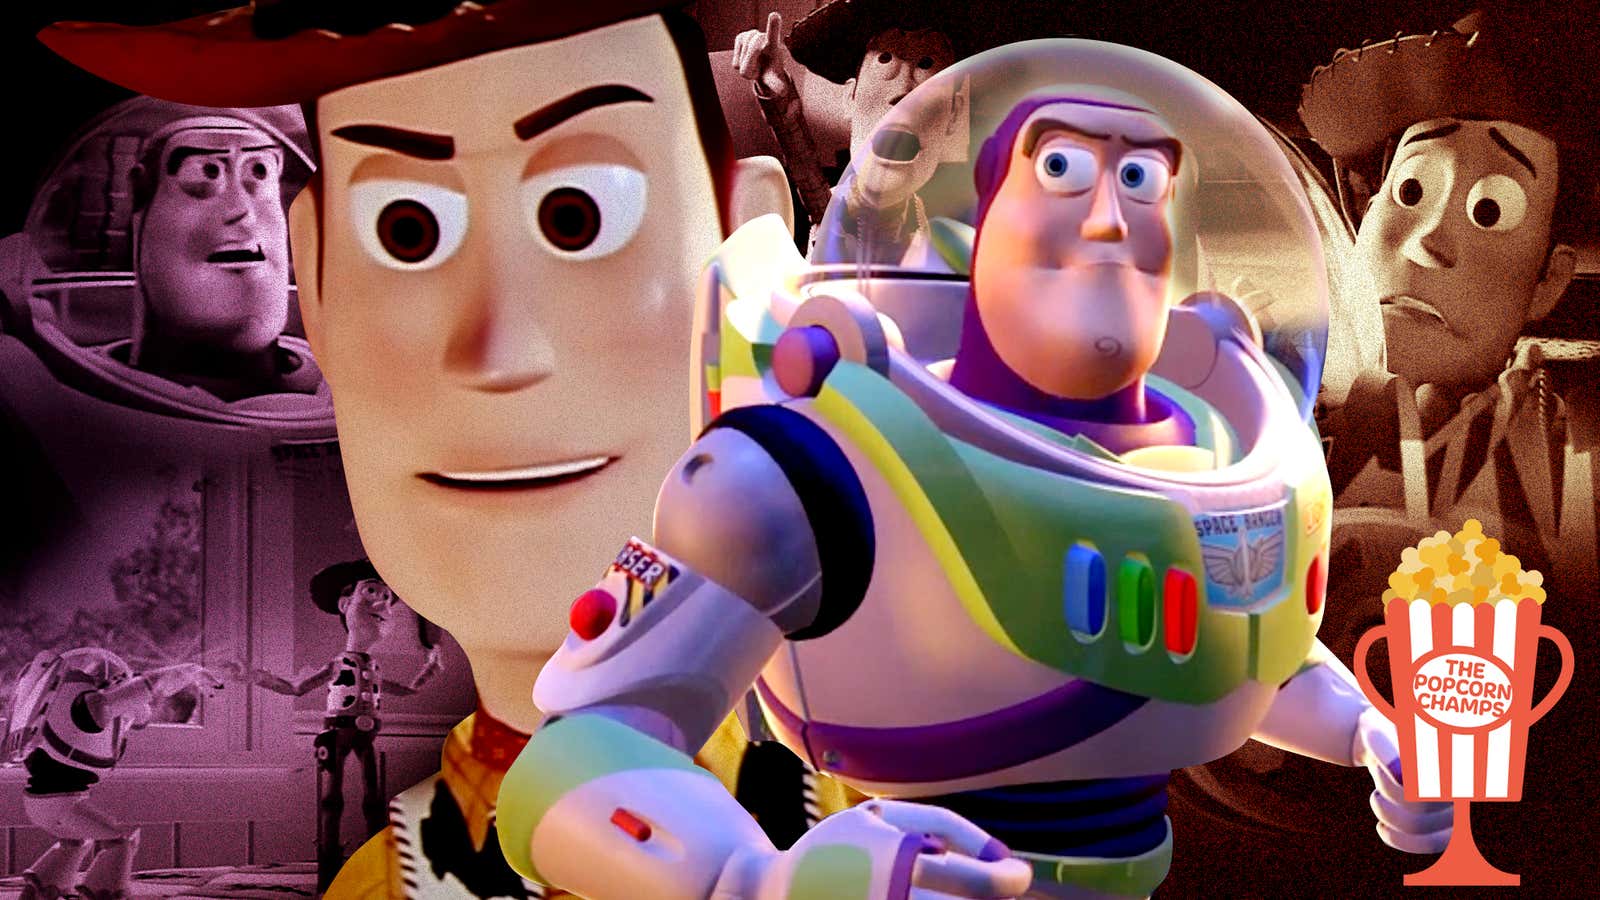 There’s no outgrowing <i>Toy Story</i>